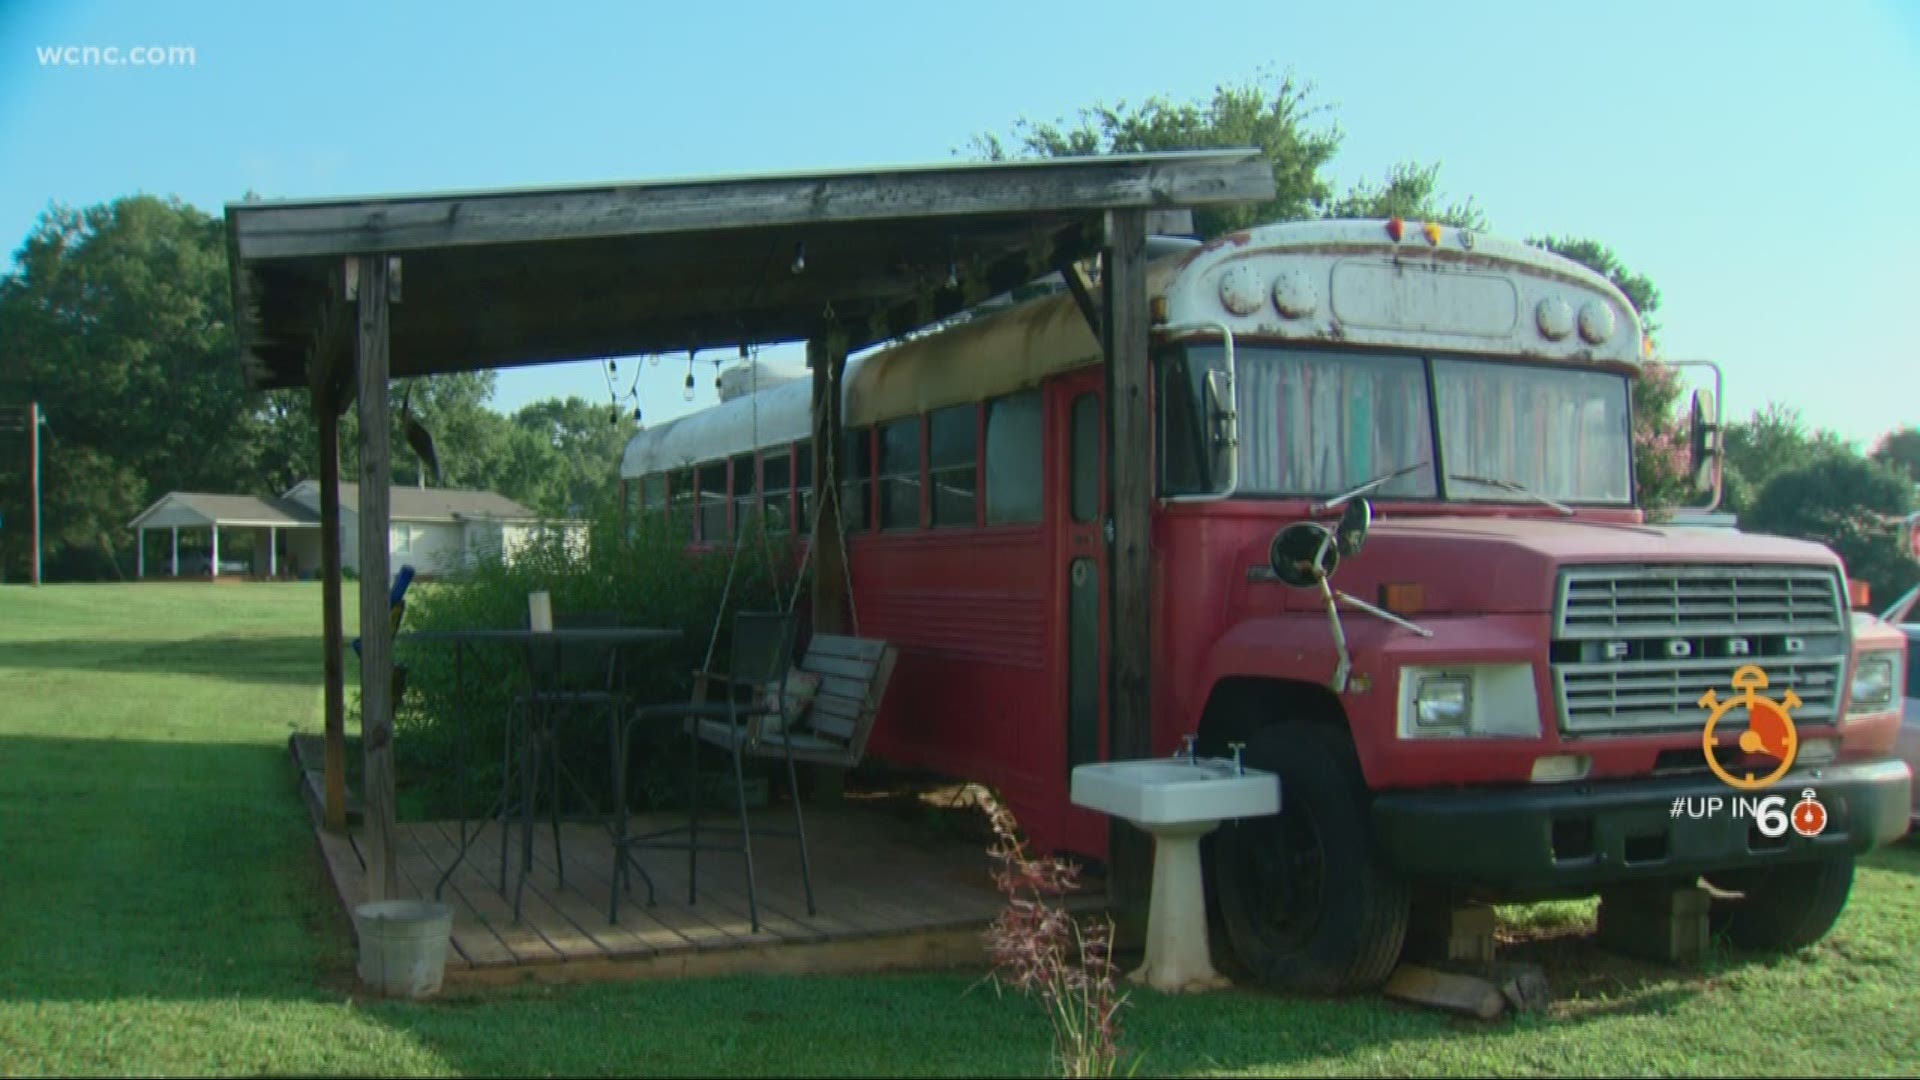 The town of Shelby is home to one of North Carolina's most popular Airbnb rentals. You can spend the night sleeping in an old school bus. We got a behind-the-scenes tour of the unique property.